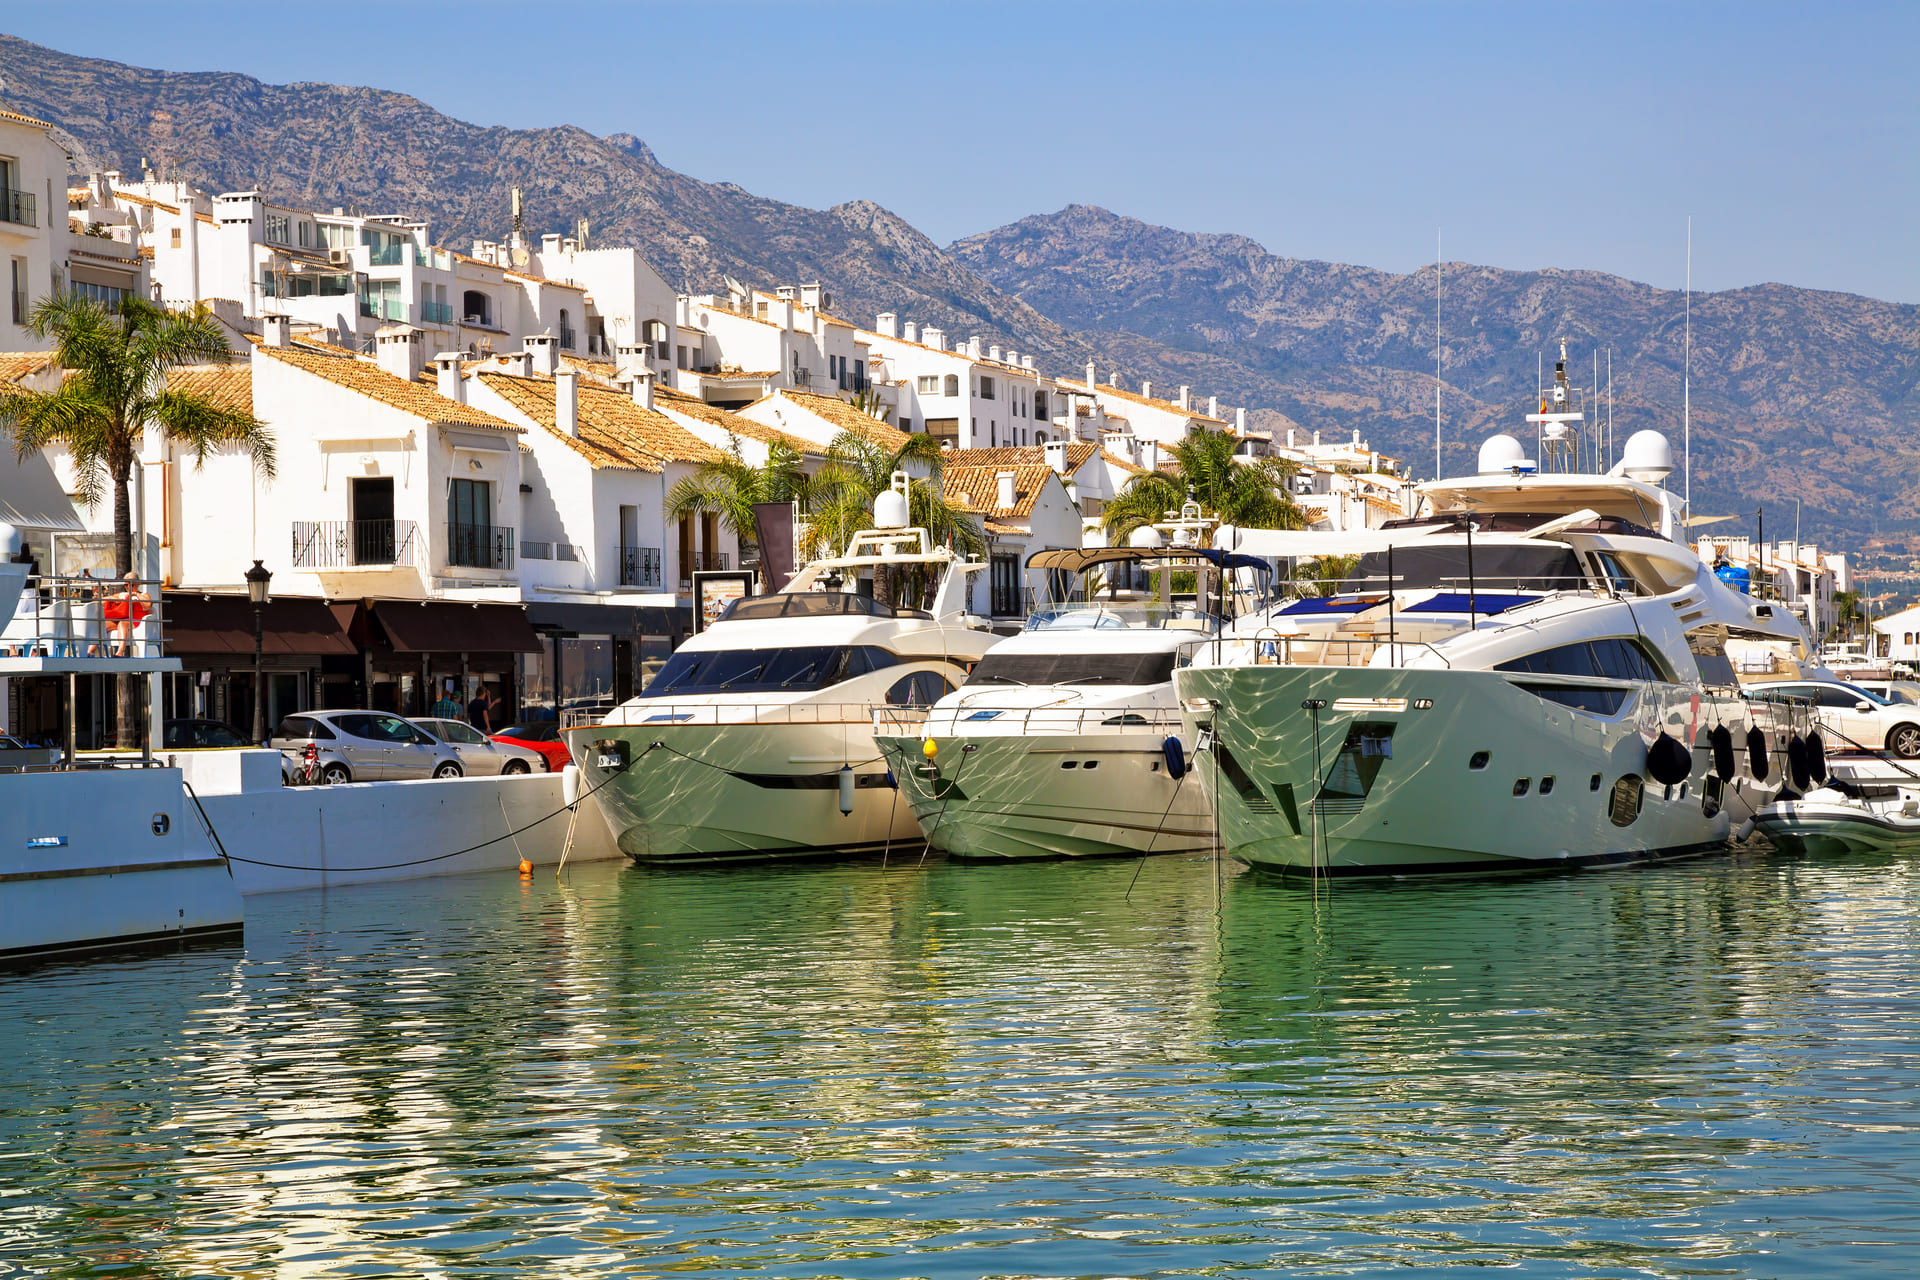 Why buy a property in Puerto Banús